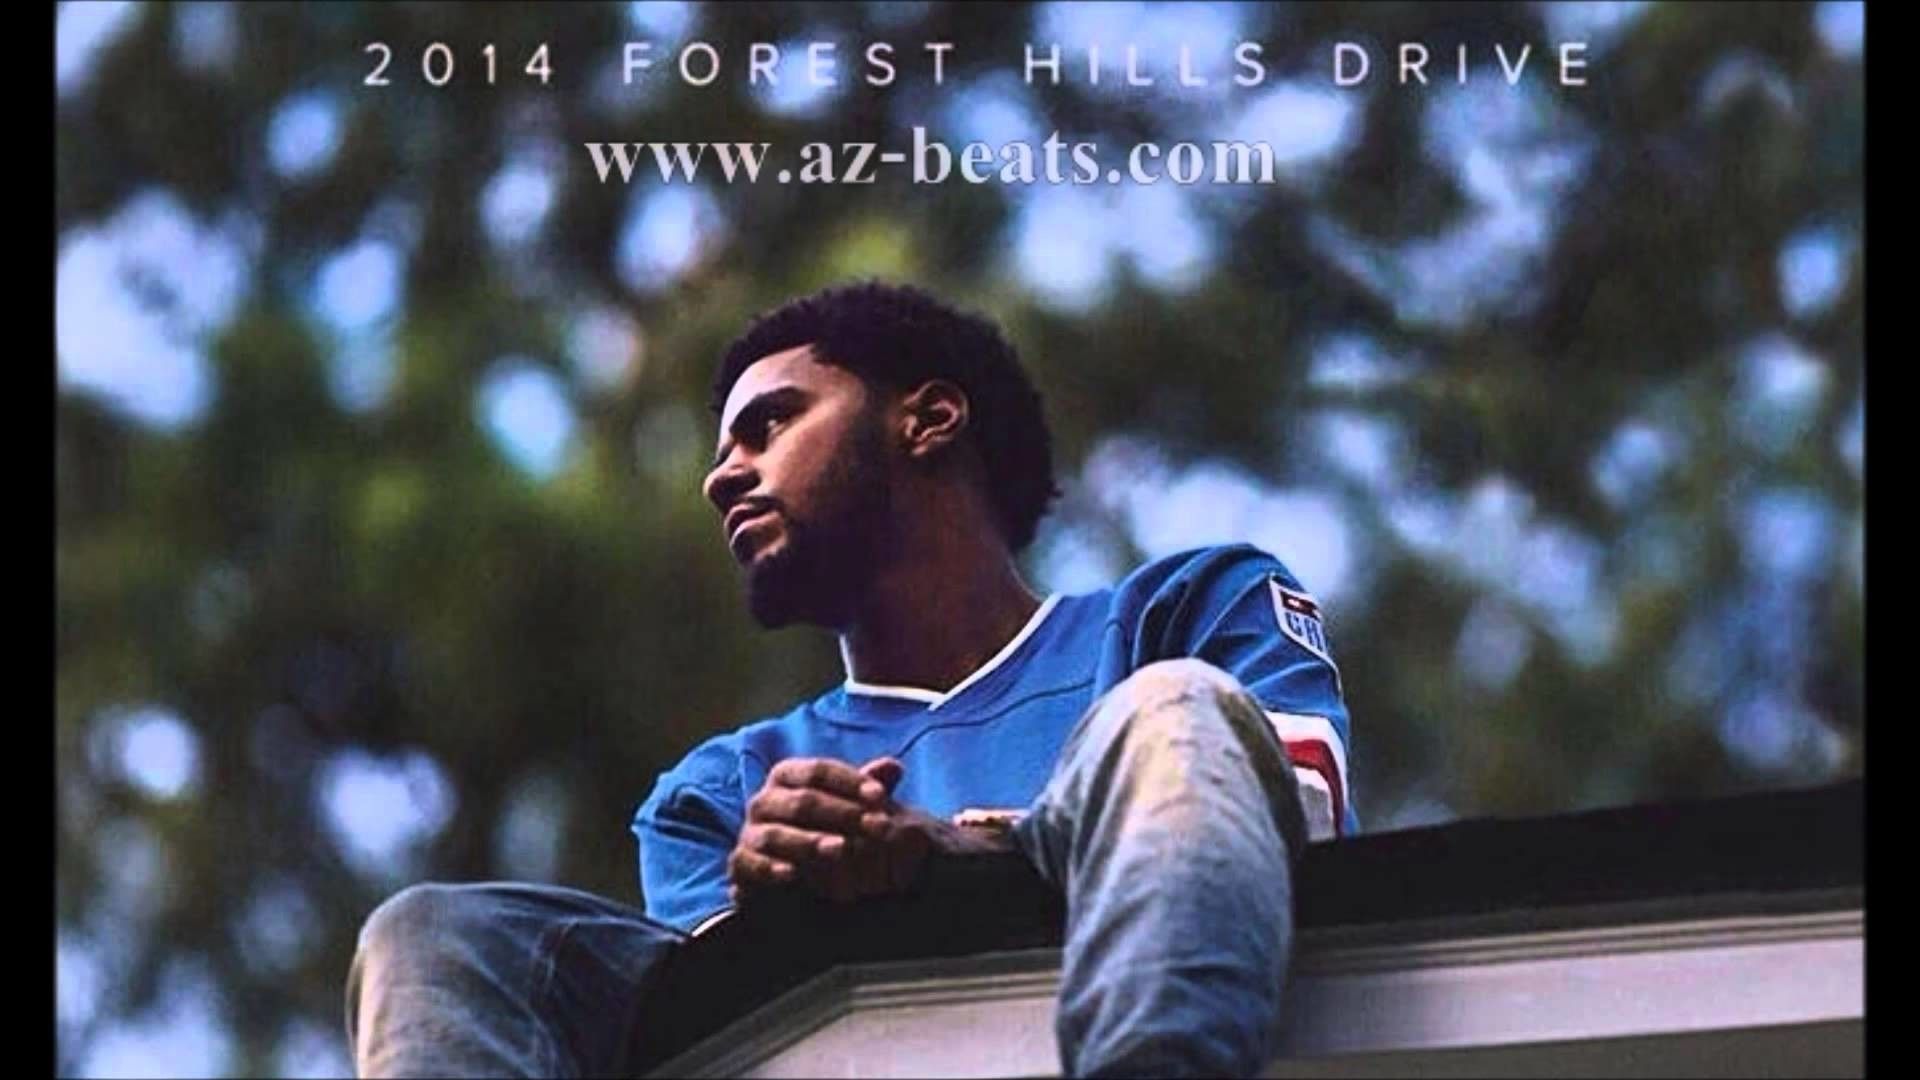 Forest Hills Drive